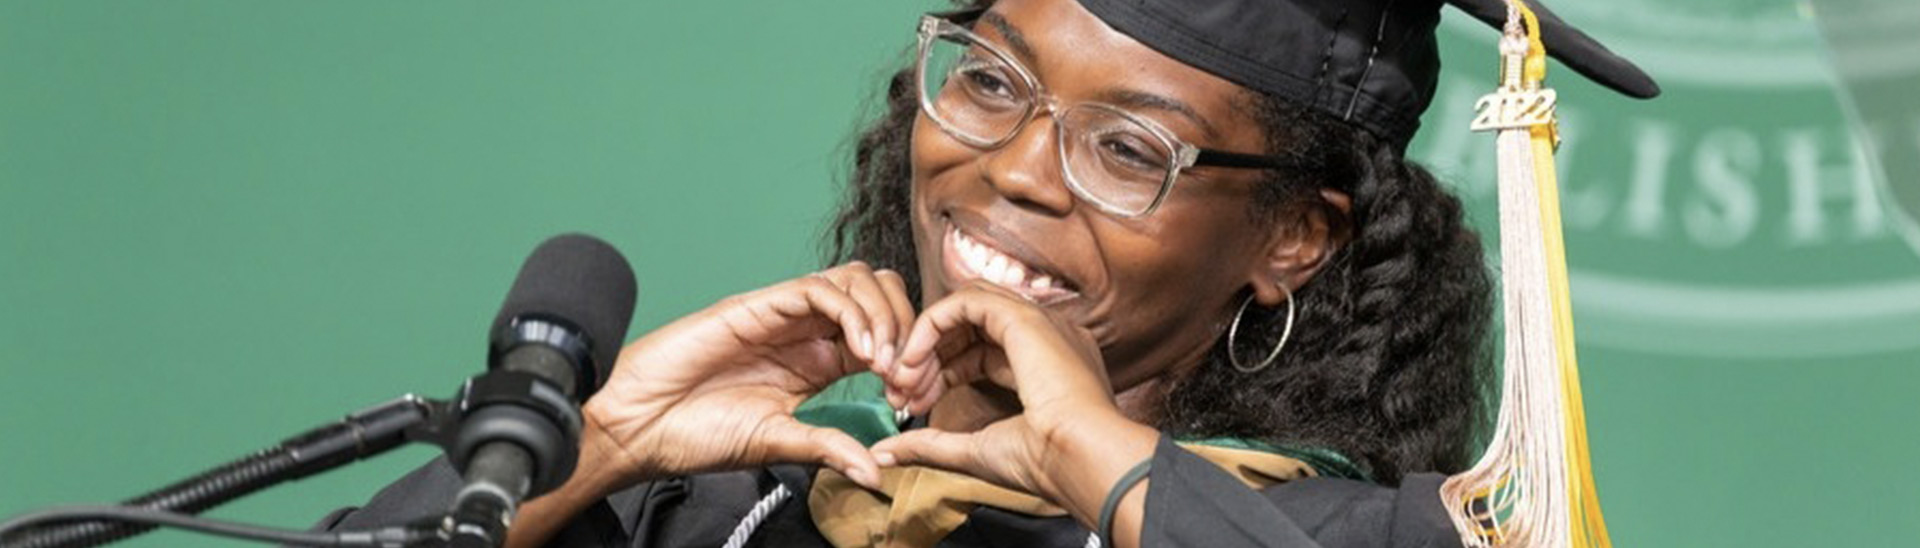 graduating student makes a heart shape with hands